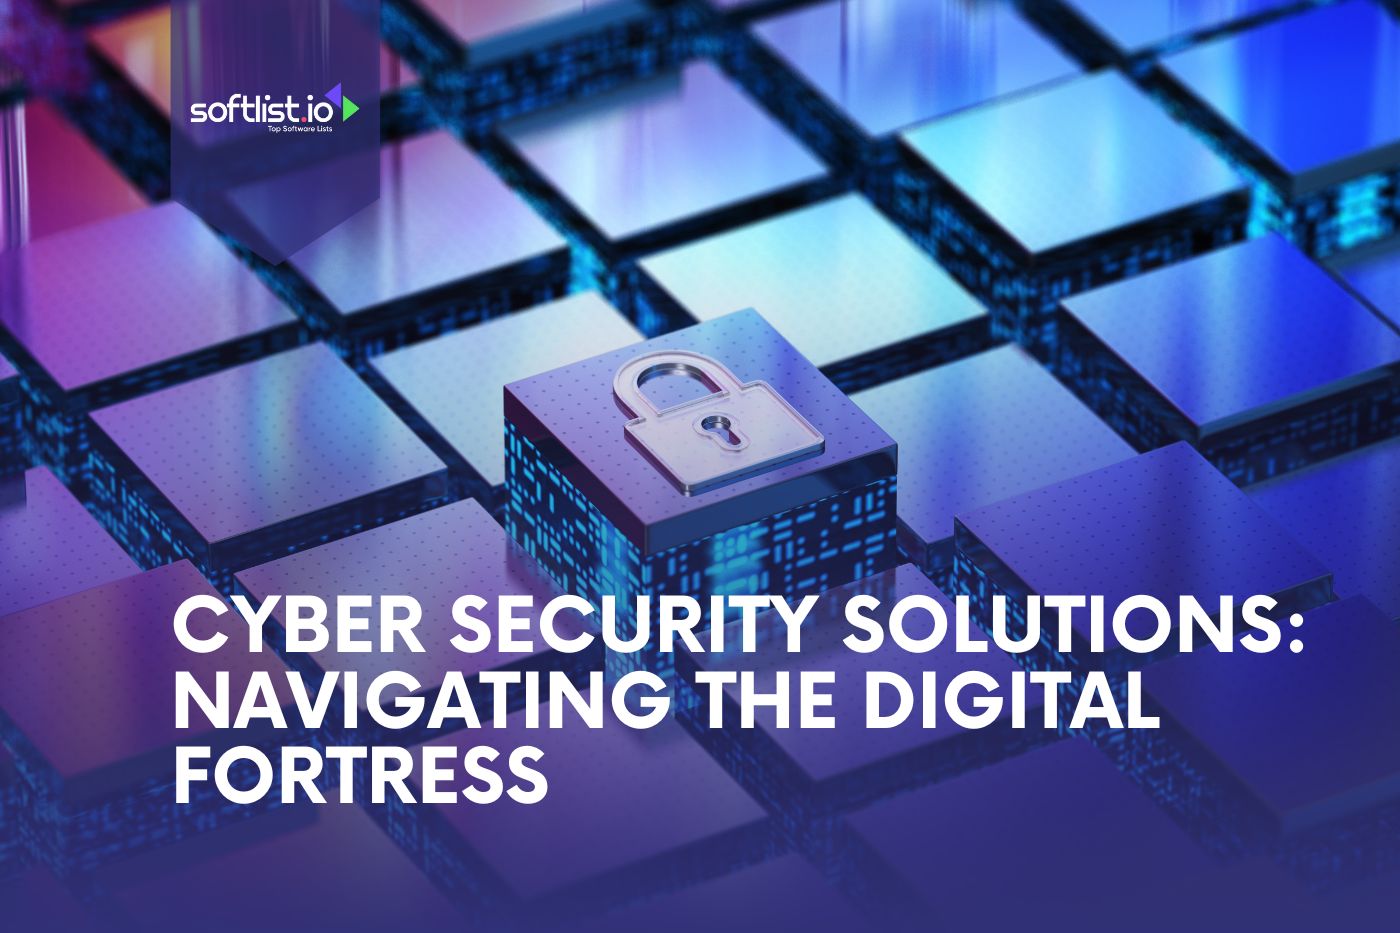 Cyber Security Solutions Navigating the Digital Fortress